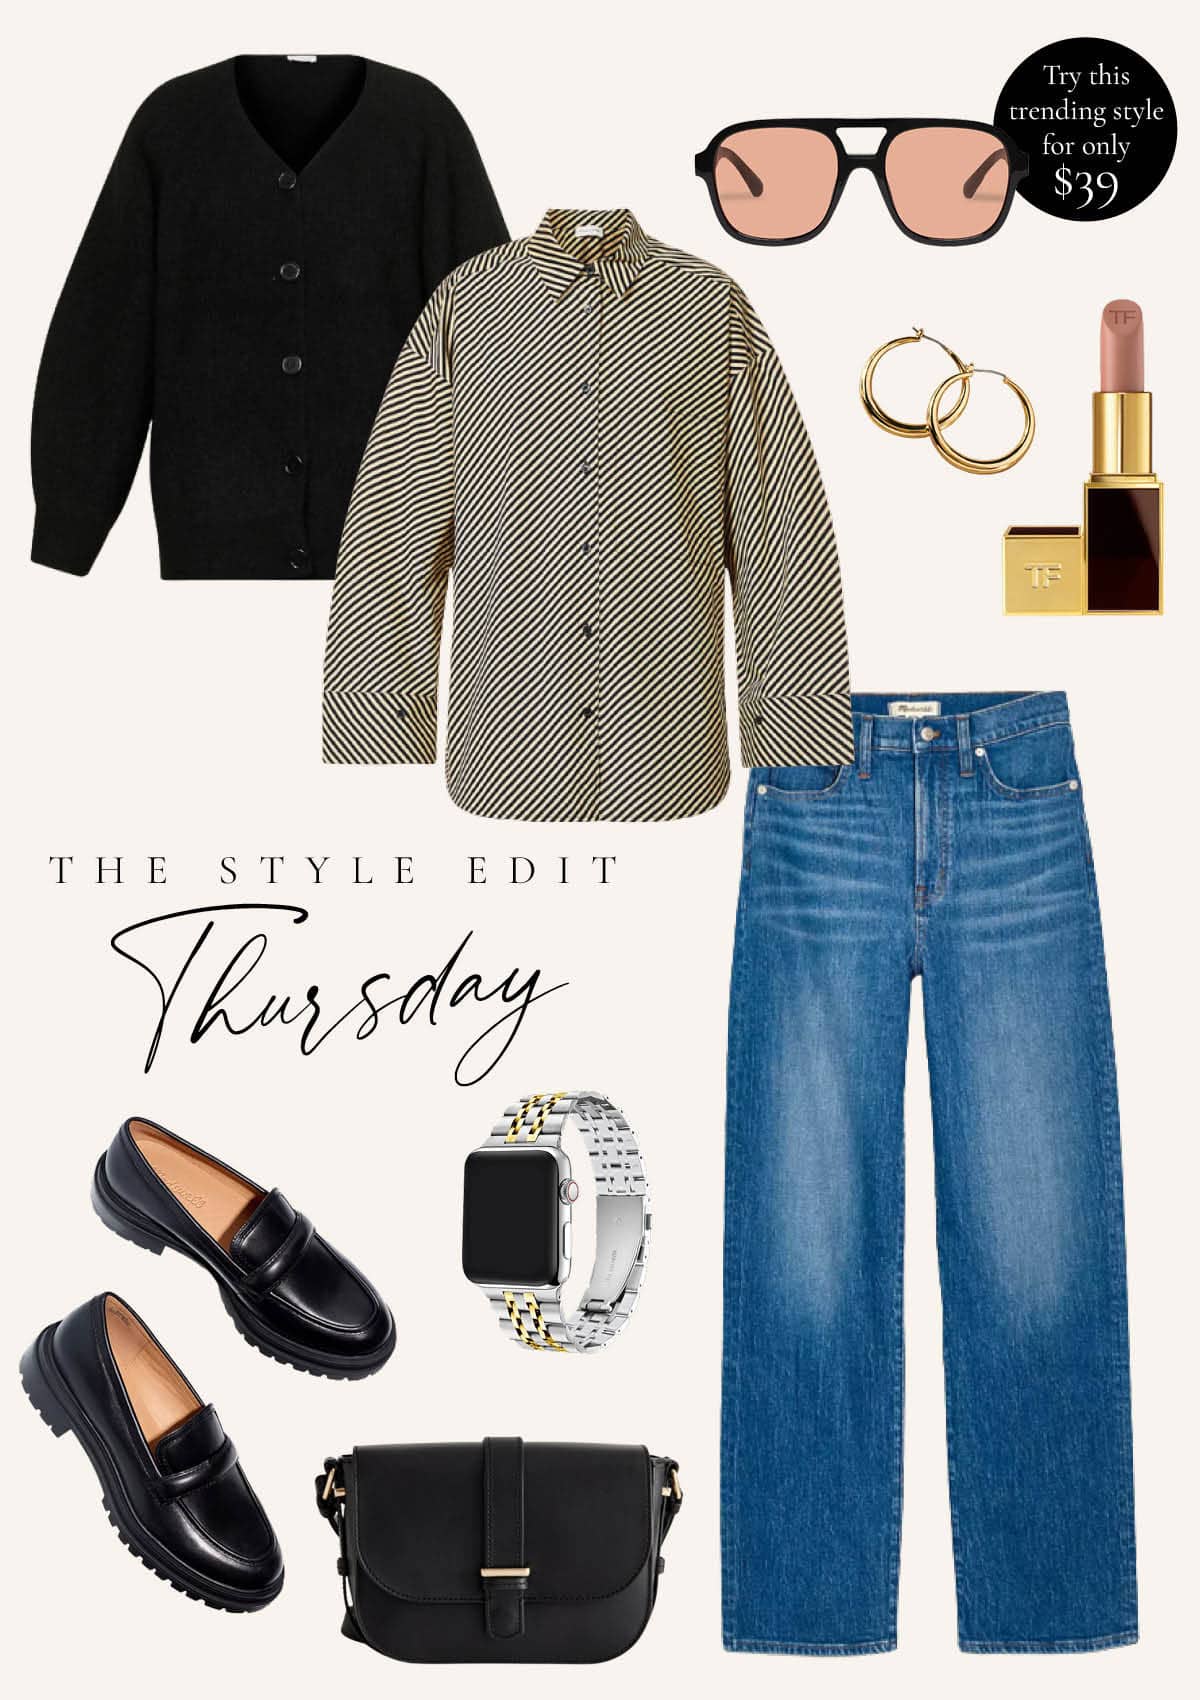 Trendy mom style outfit inspiration